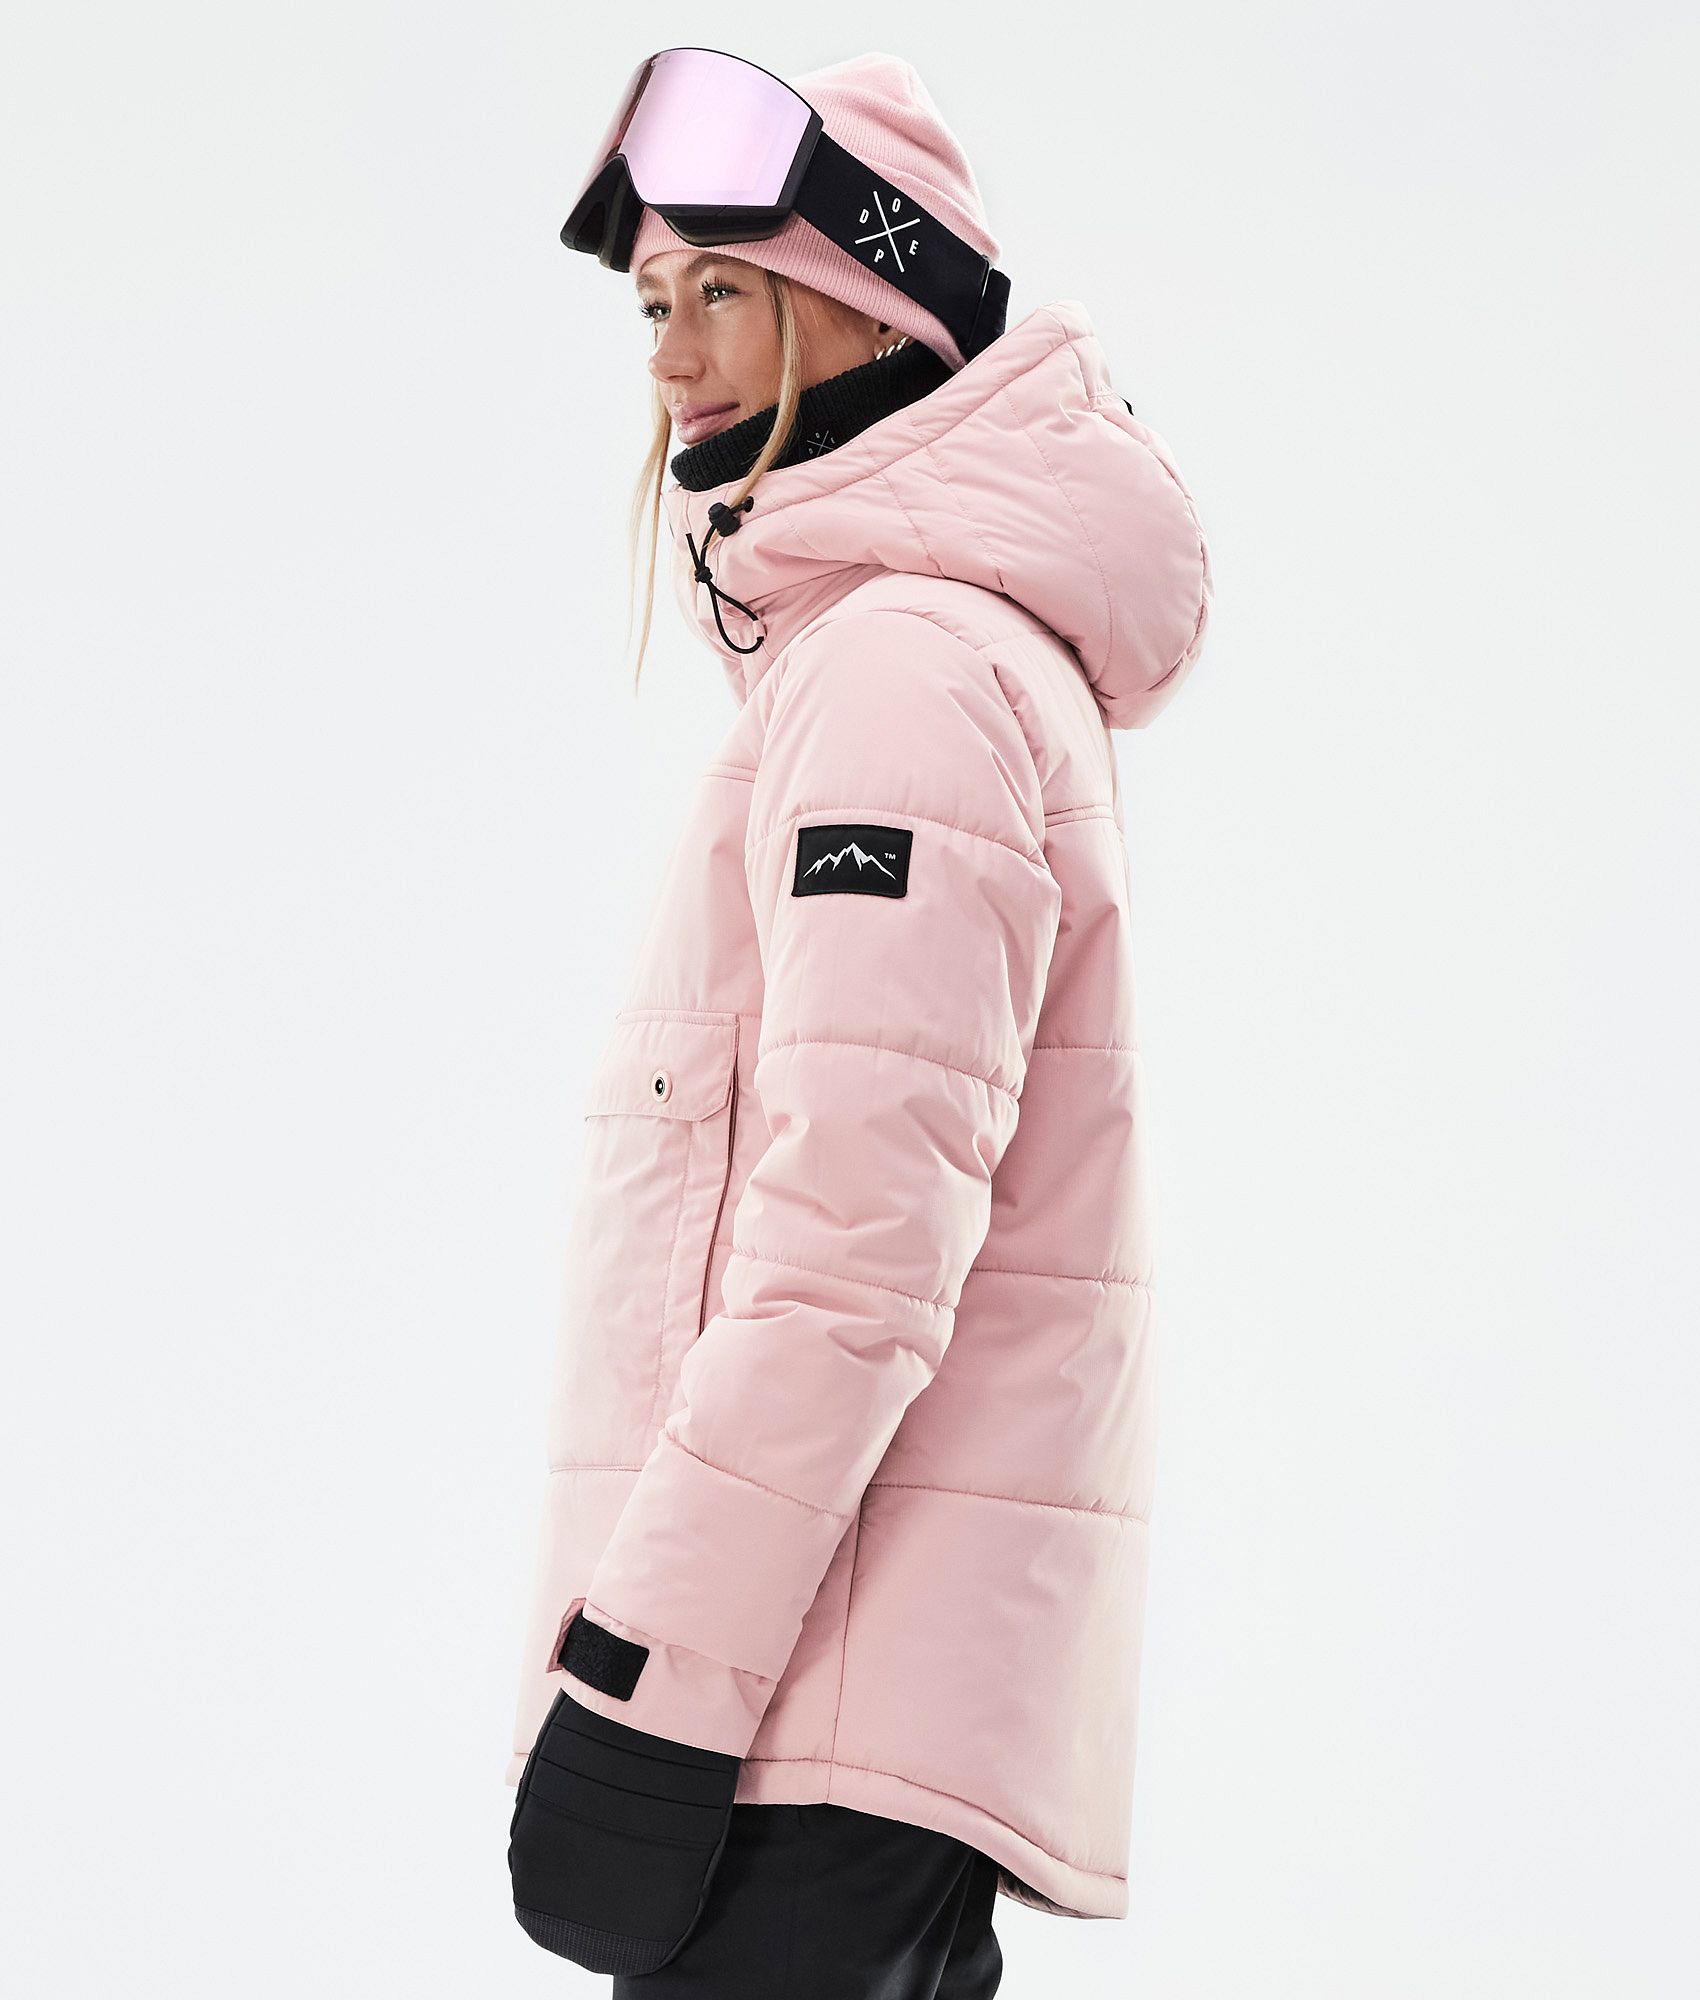 Nuuk Puffer Jacket Jr - Pure Pink HP Foil – THE HOLIDAY PROJECT